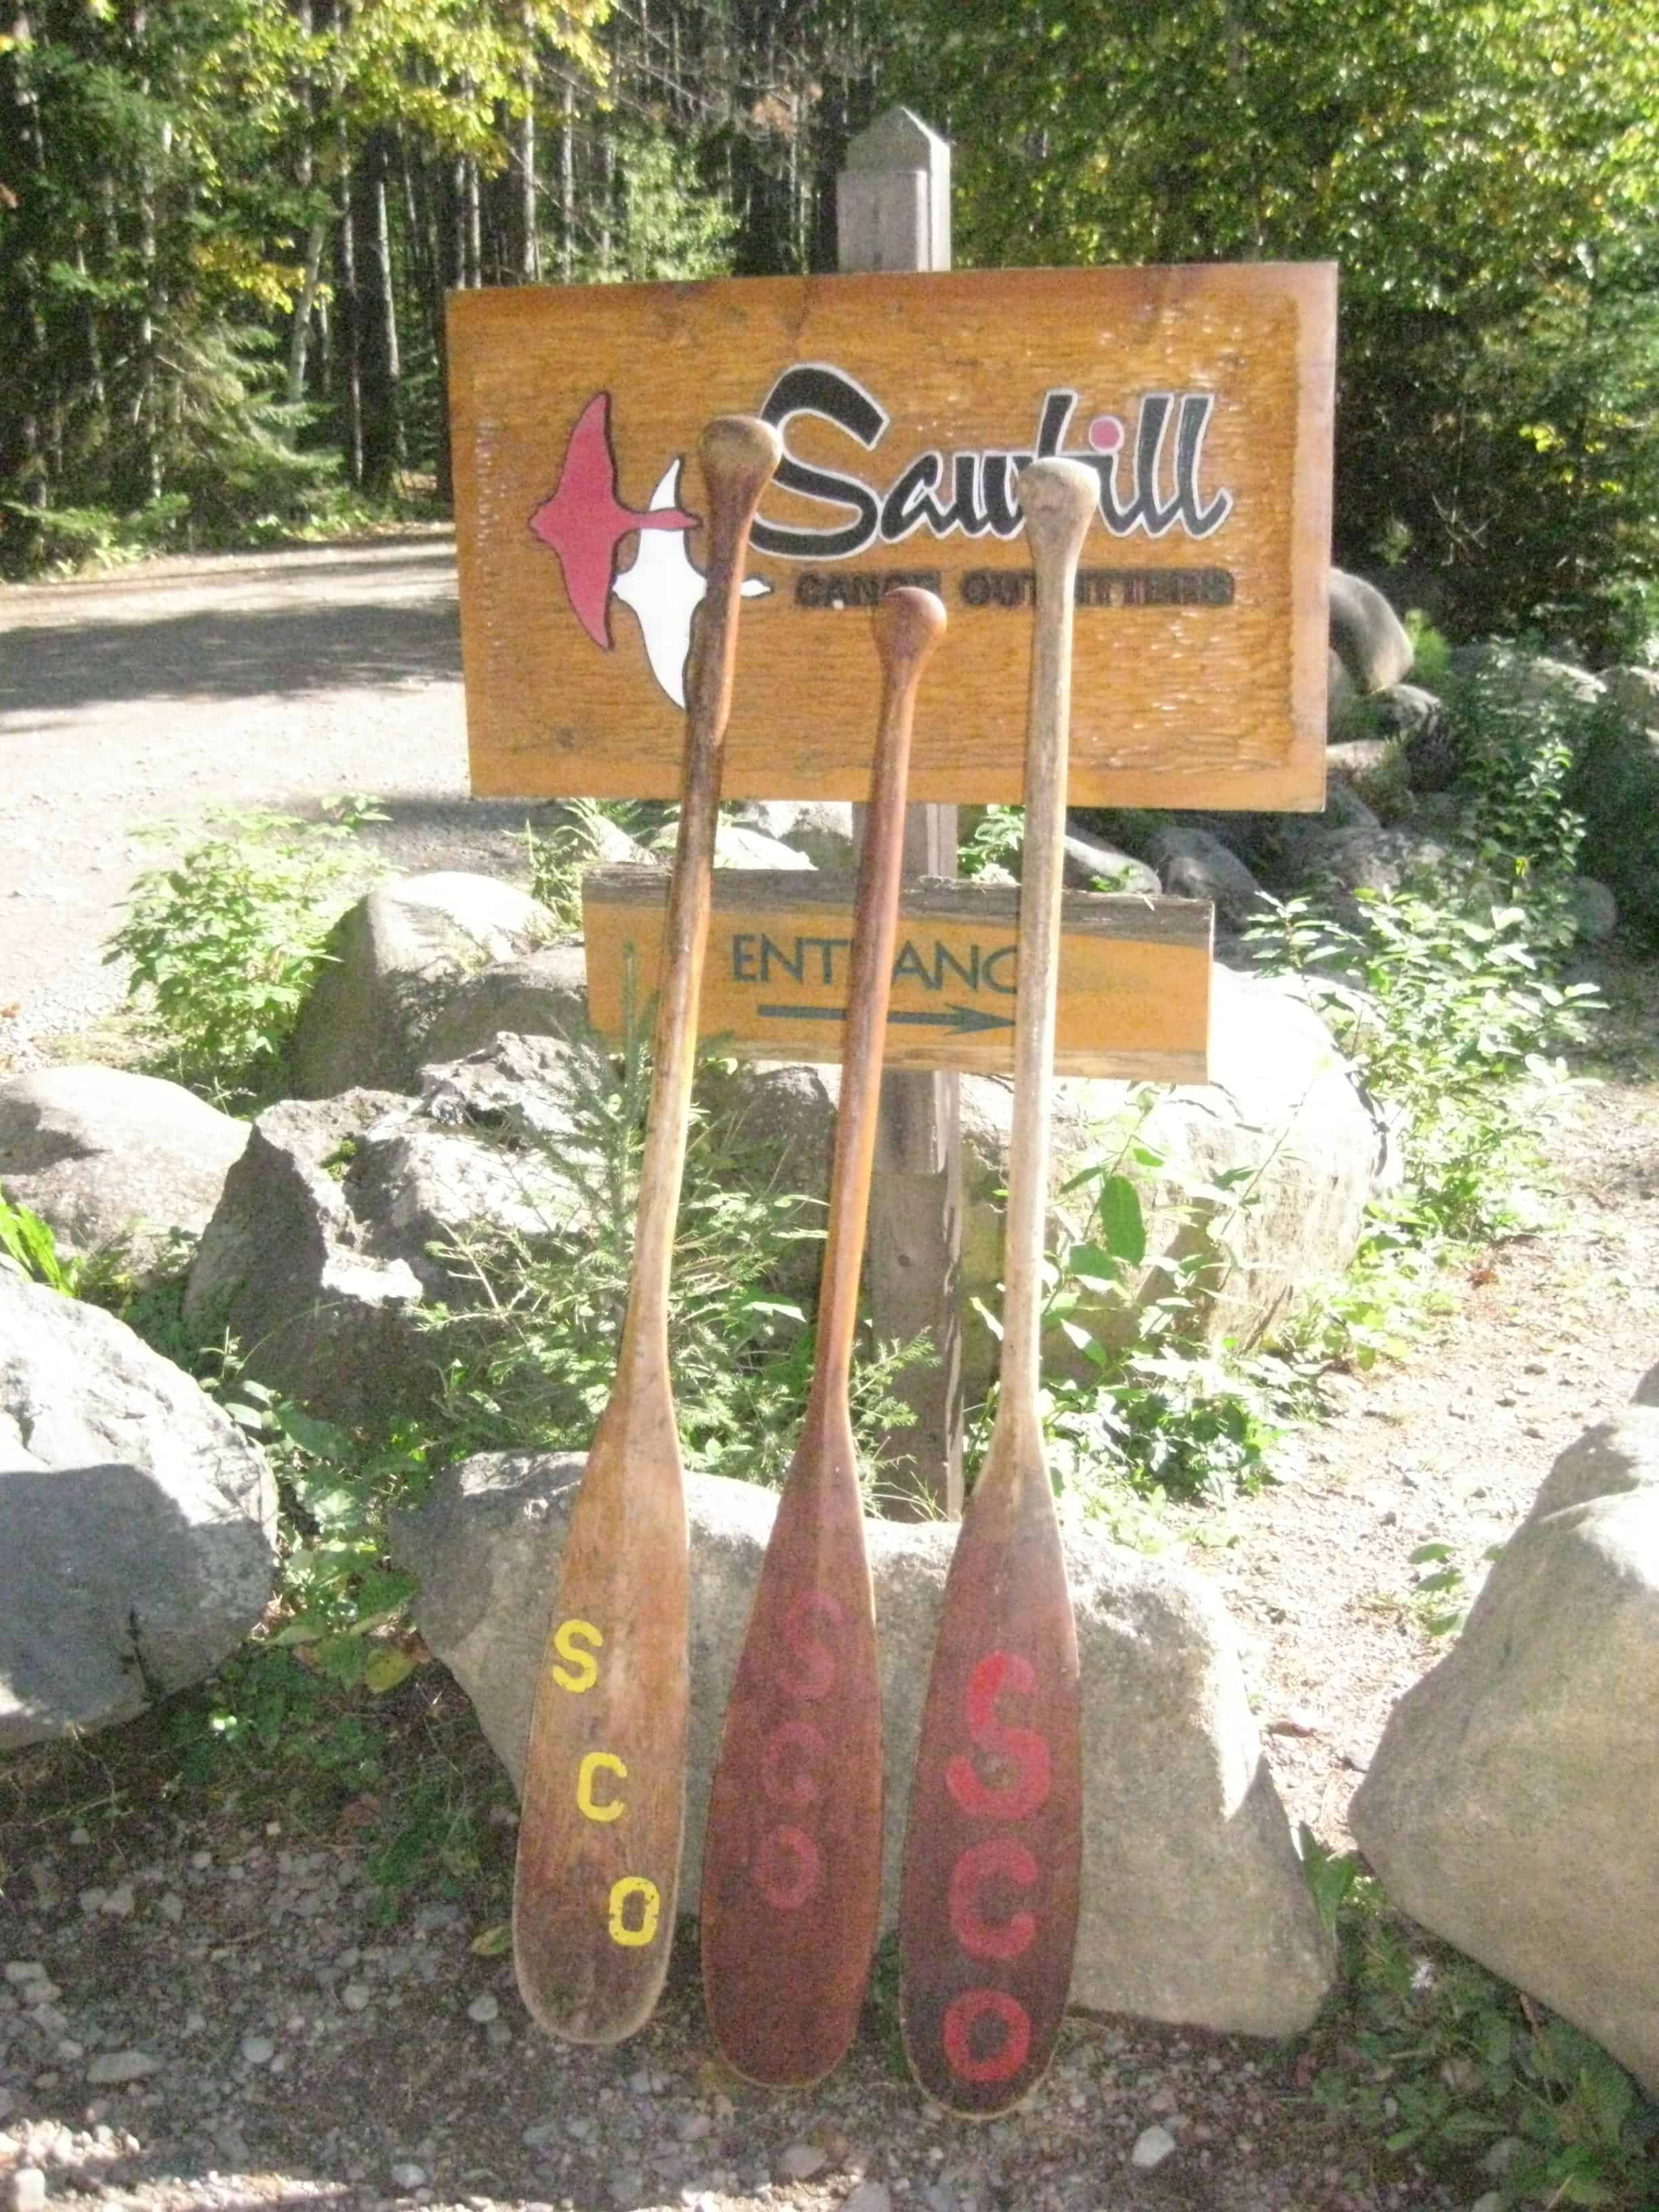 Sawbill Canoe Outfitters has been owned and managed by three generations of the same family. Photo courtesy Bill Hansen.